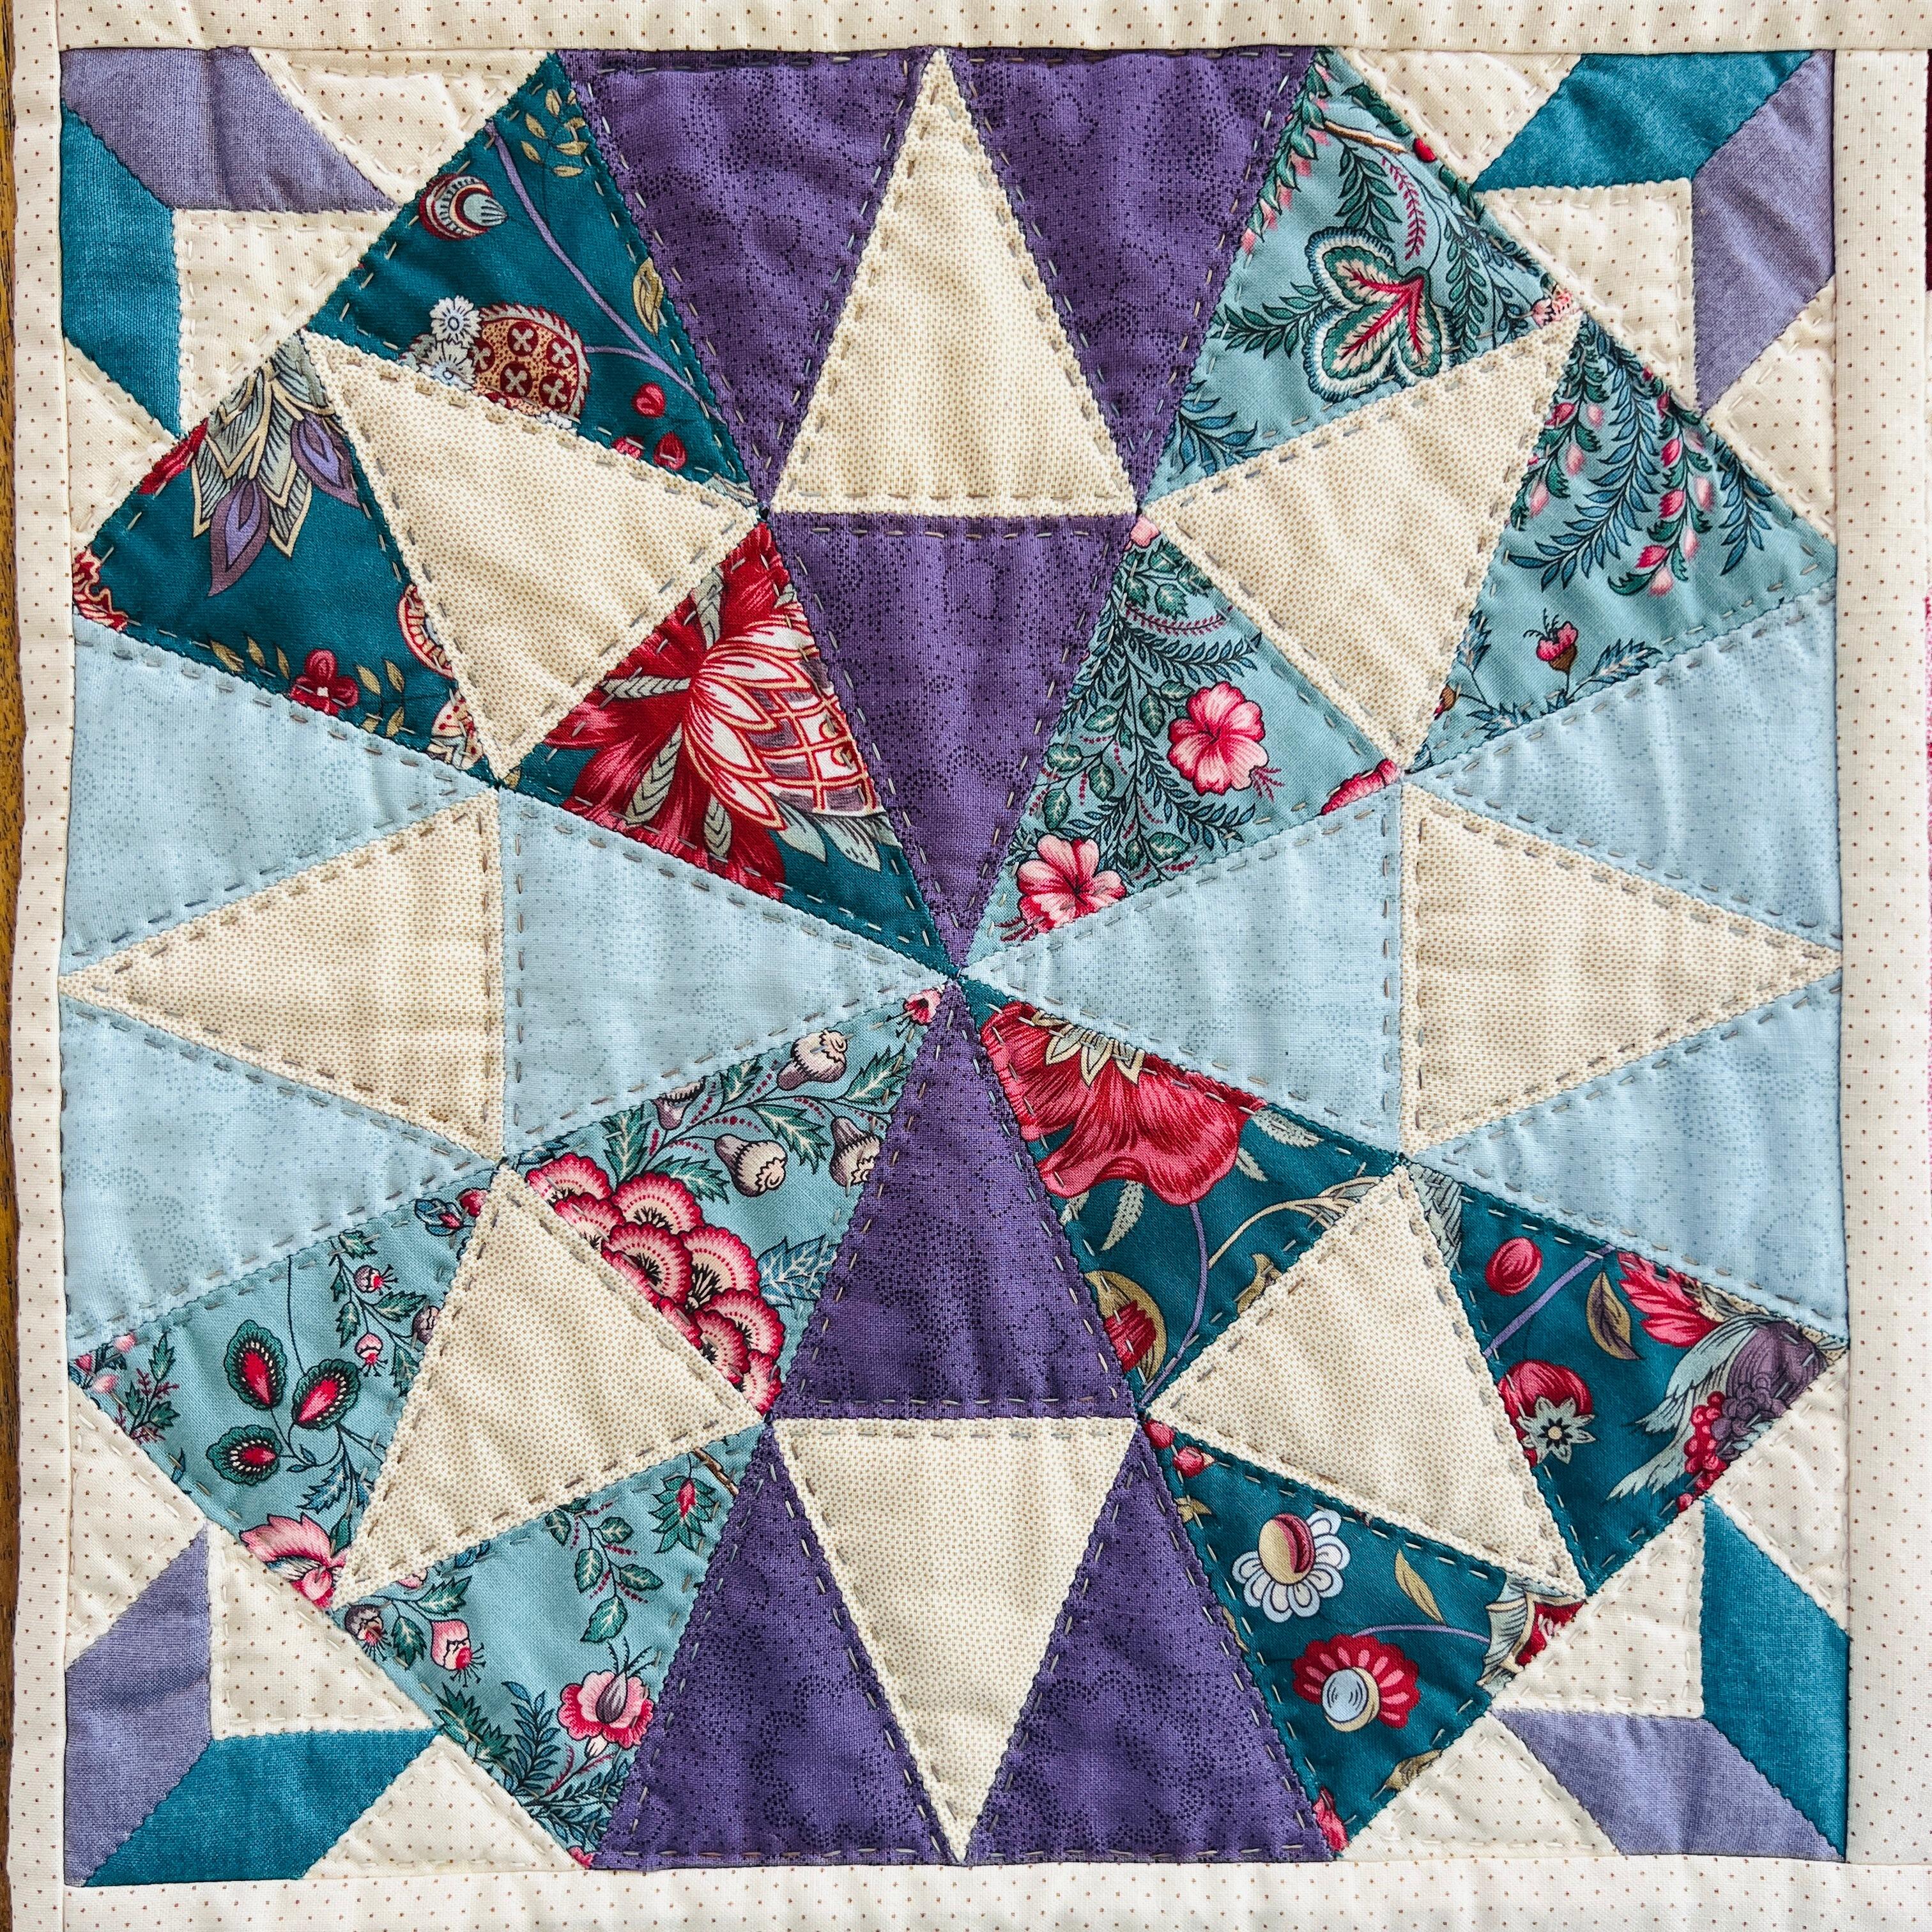 Glorious Patchwork: More Than 25 Glorious Quilt Designs [Book]